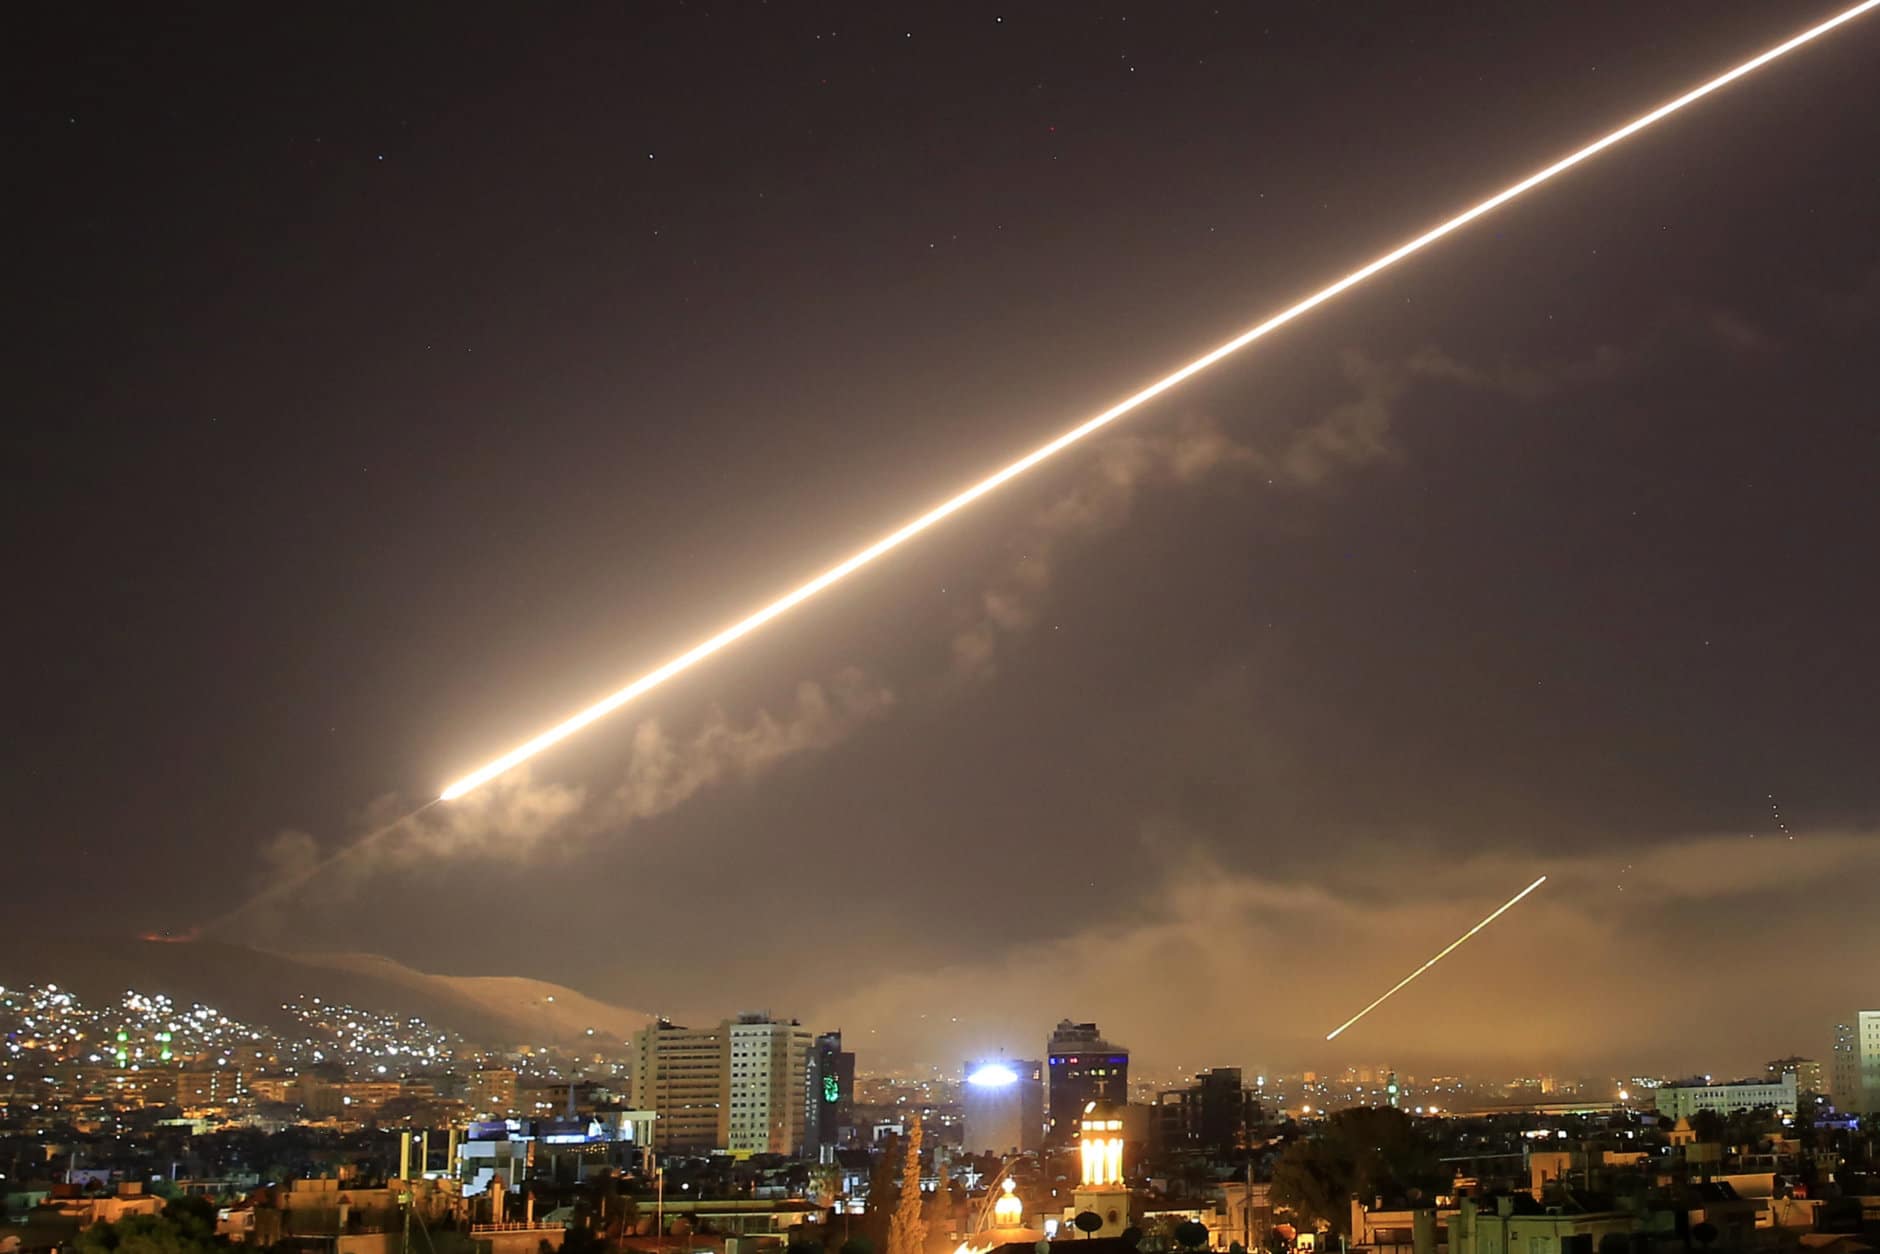 Surface to air missile fire lights up the sky over Damascus at the U.S. launches an attack on Syria early on April 14, 2018. U.S. President Donald Trump ordered the airstrikes in retaliation for Syria's alleged use of chemical weapons. (AP Photo/Hassan Ammar)